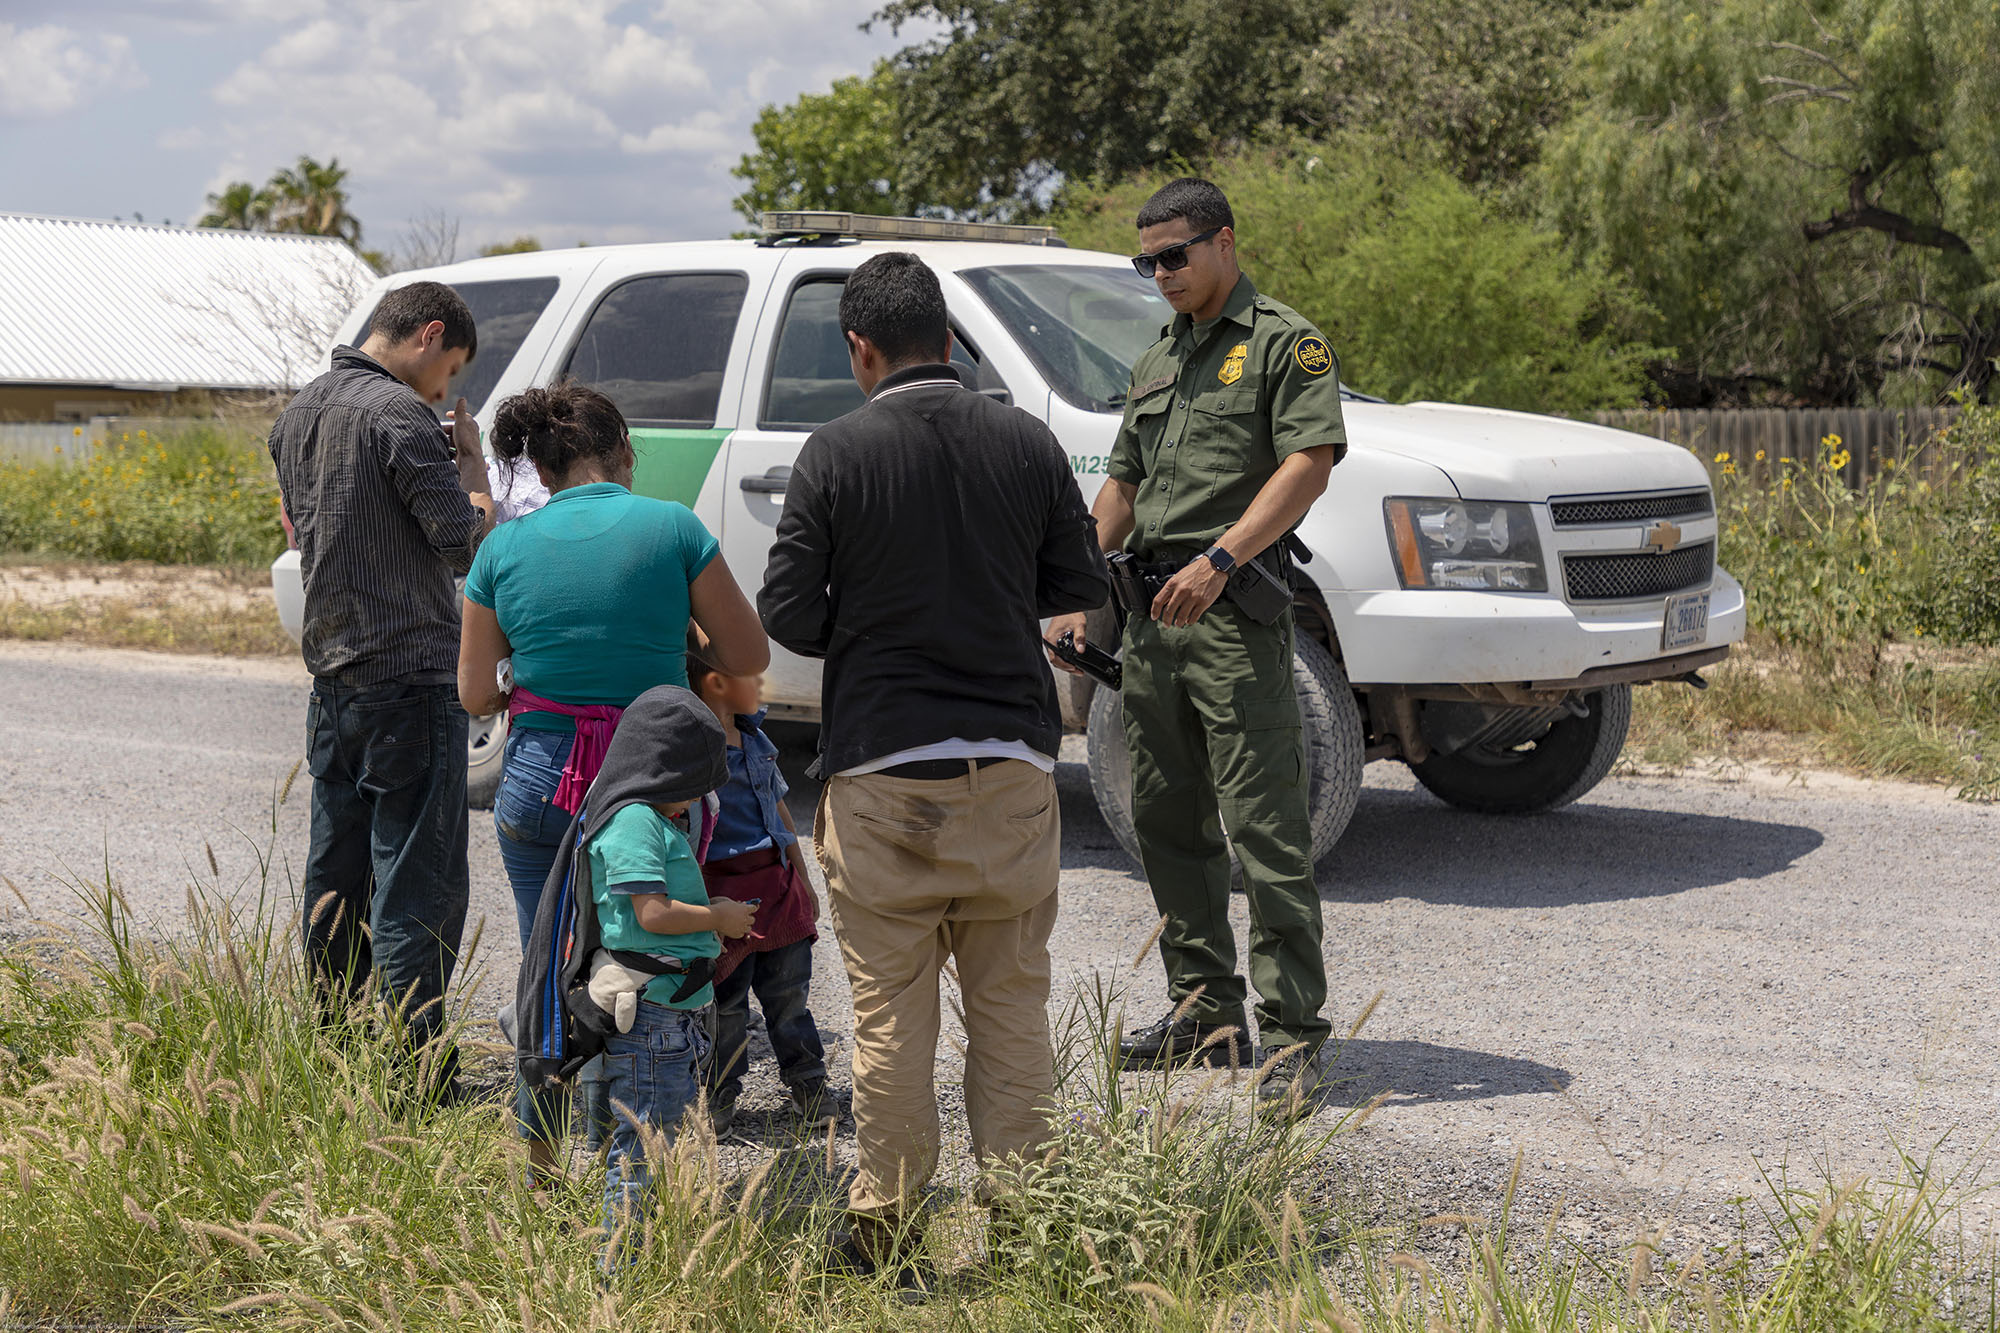 Family apprehensions at border less than adults apprehended in October